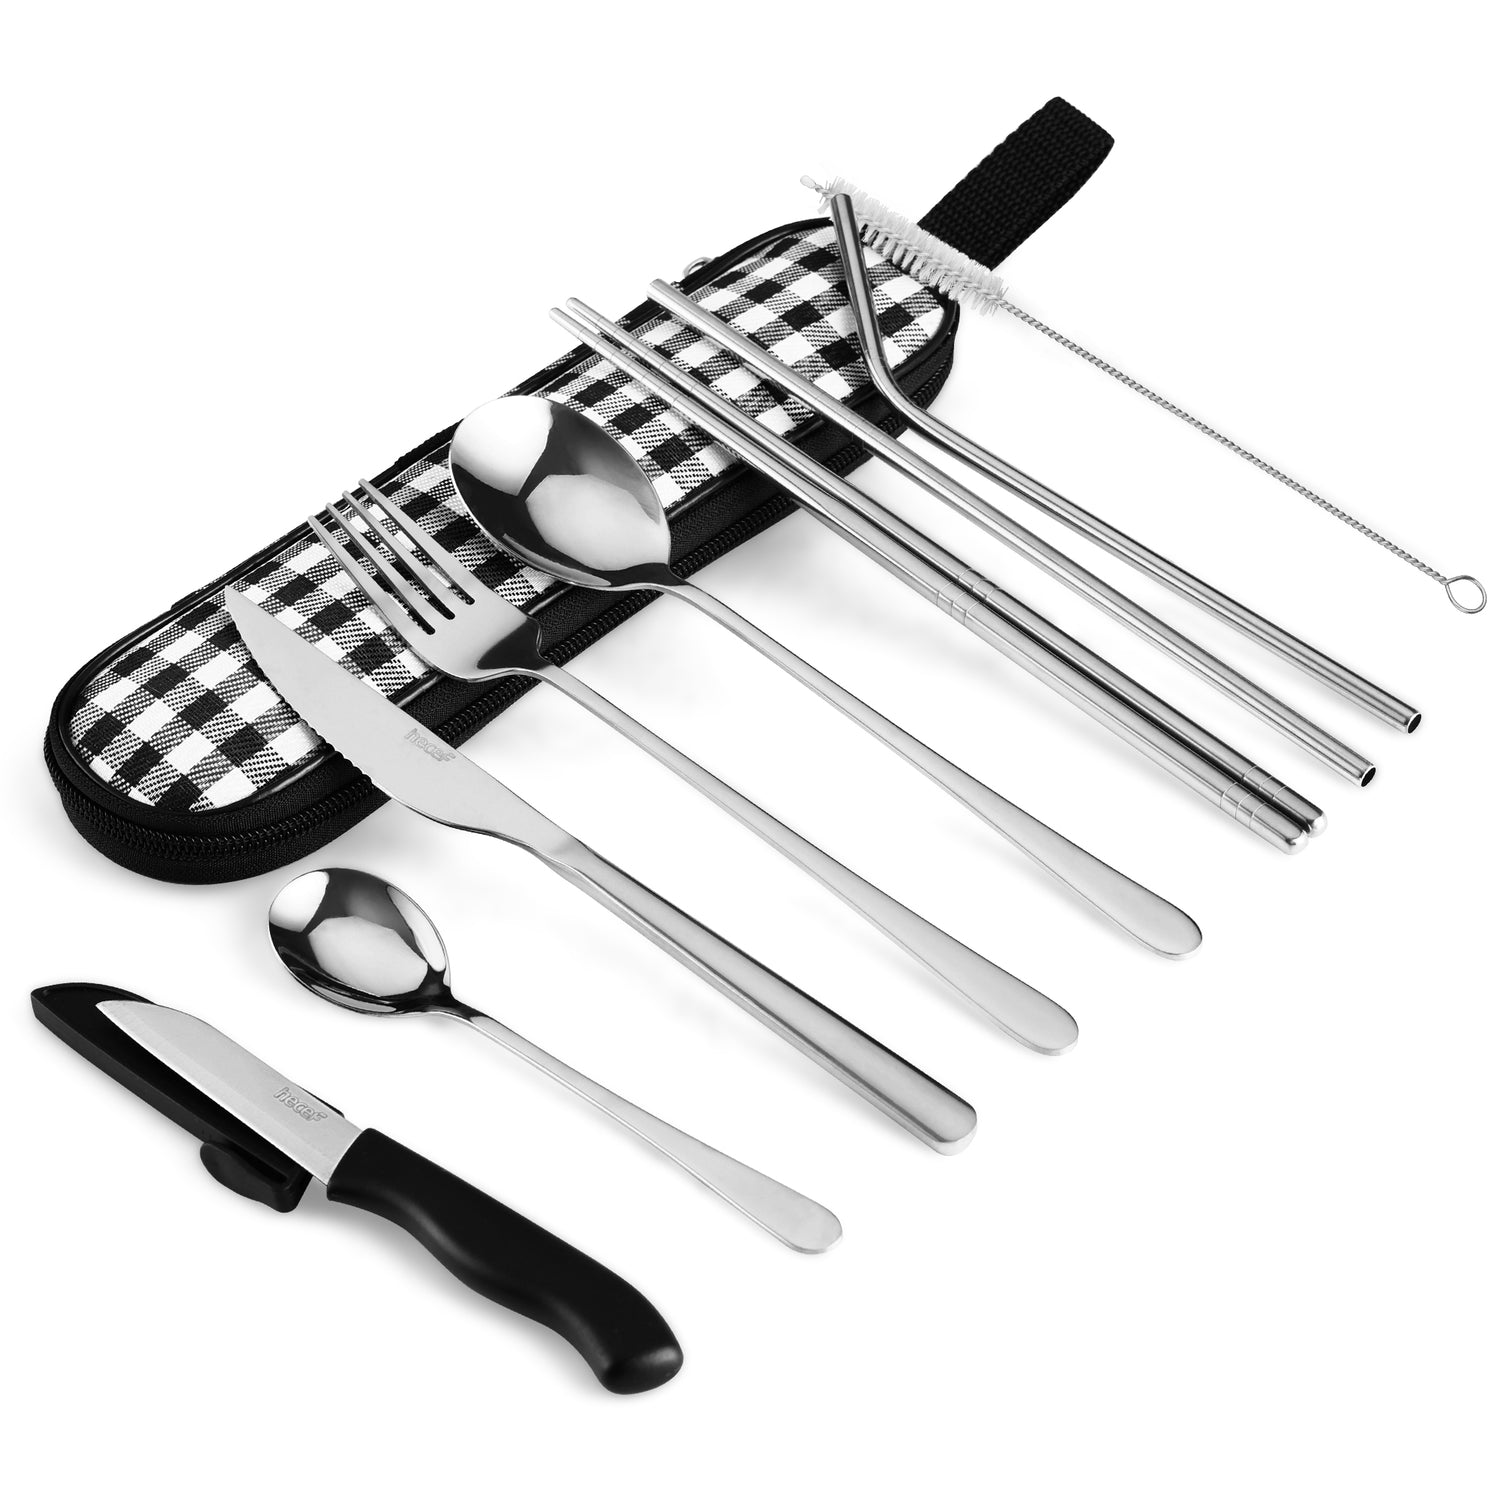 Travel Reusable Utensils Silverware with Case,Camping Cutlery set